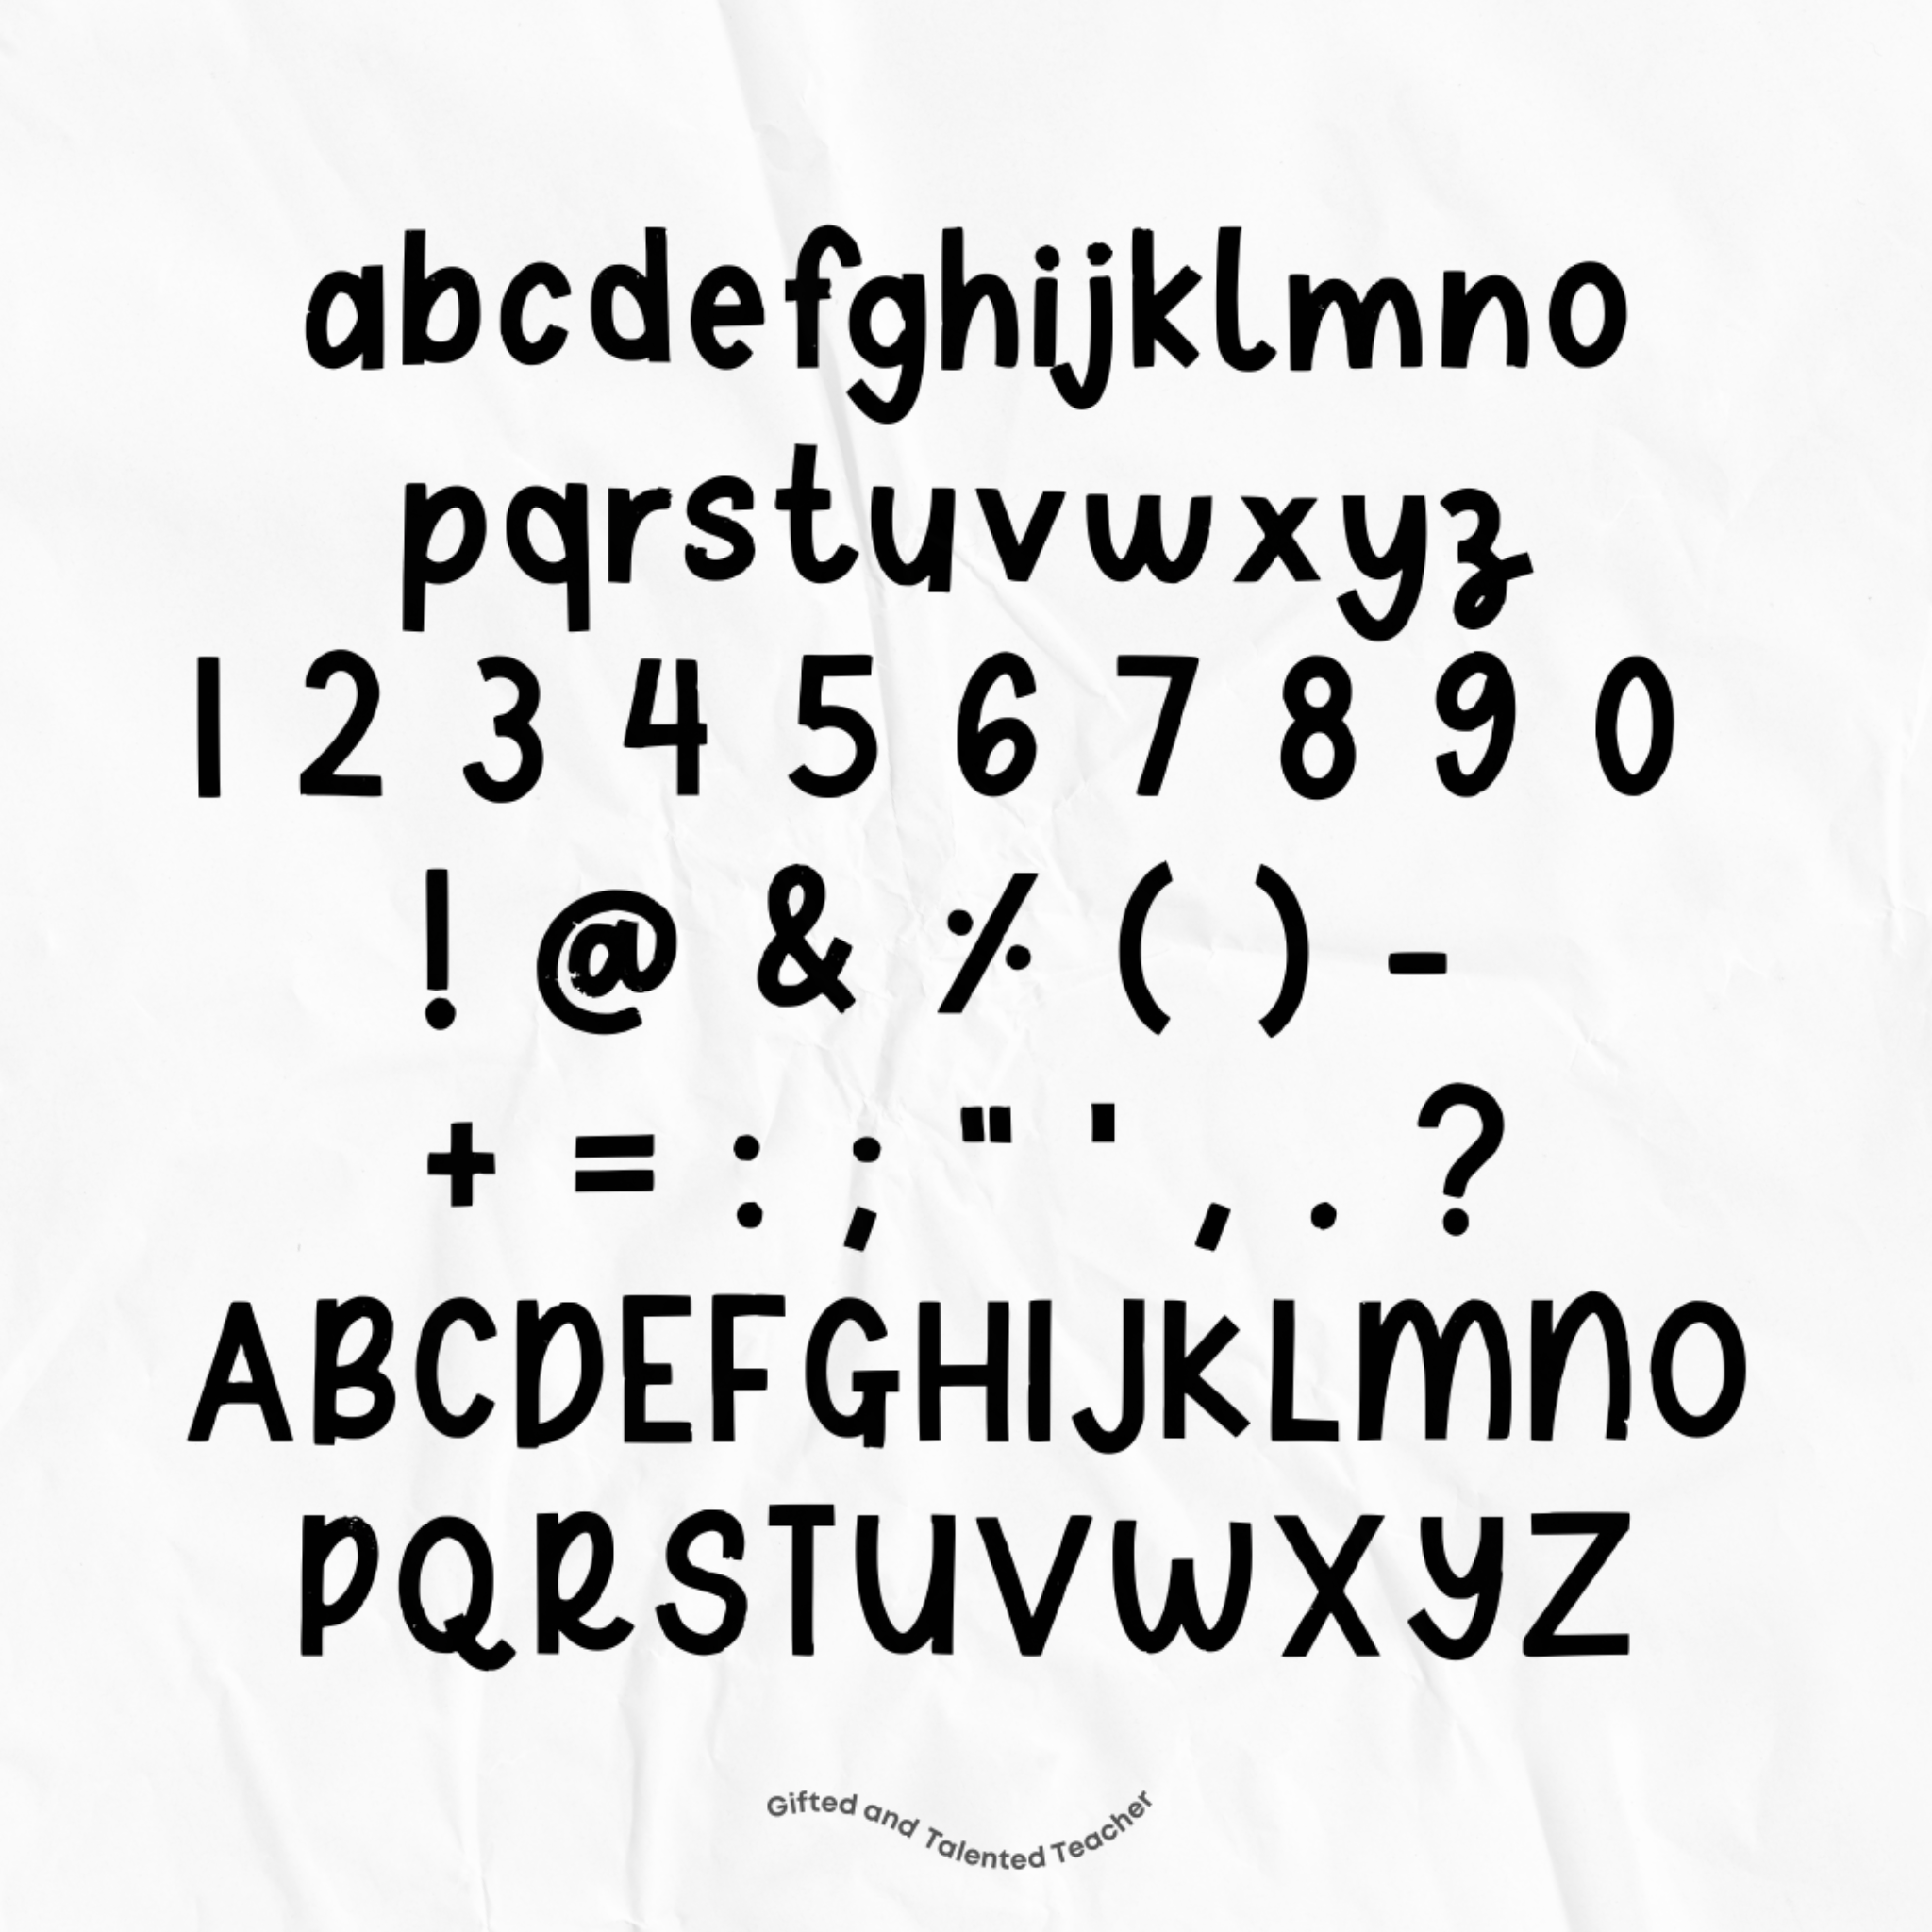 Paint It Regular - GT Font - Gifted and Talented Teacher